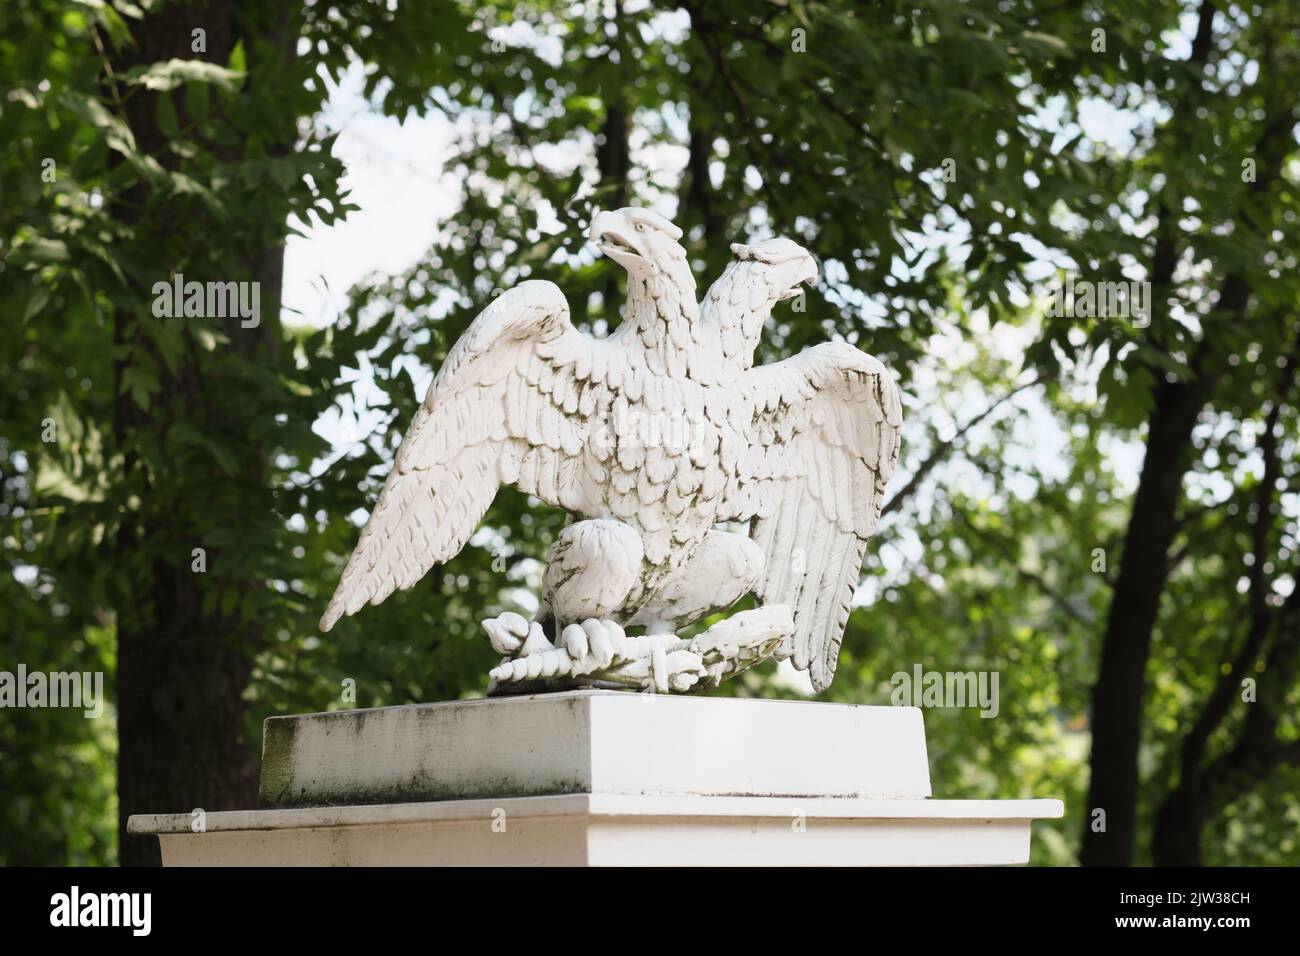 A double-headed eagle stone statue , the symbol of the Russian Federation. The architectural element of the gerden decor Stock Photo